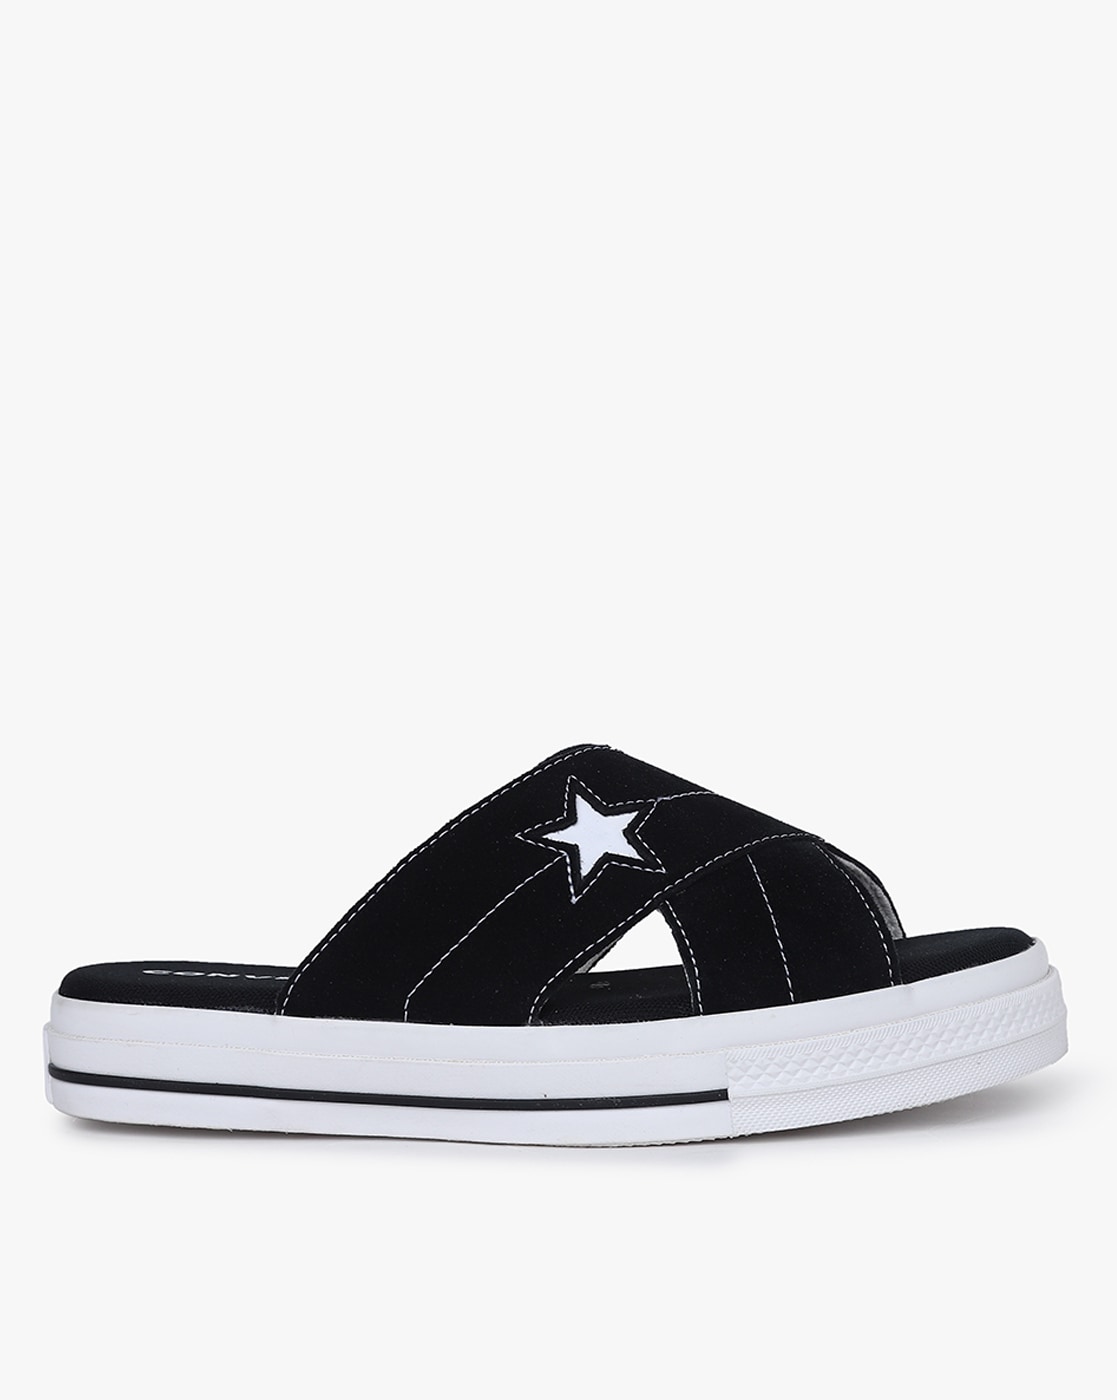 buy converse slippers